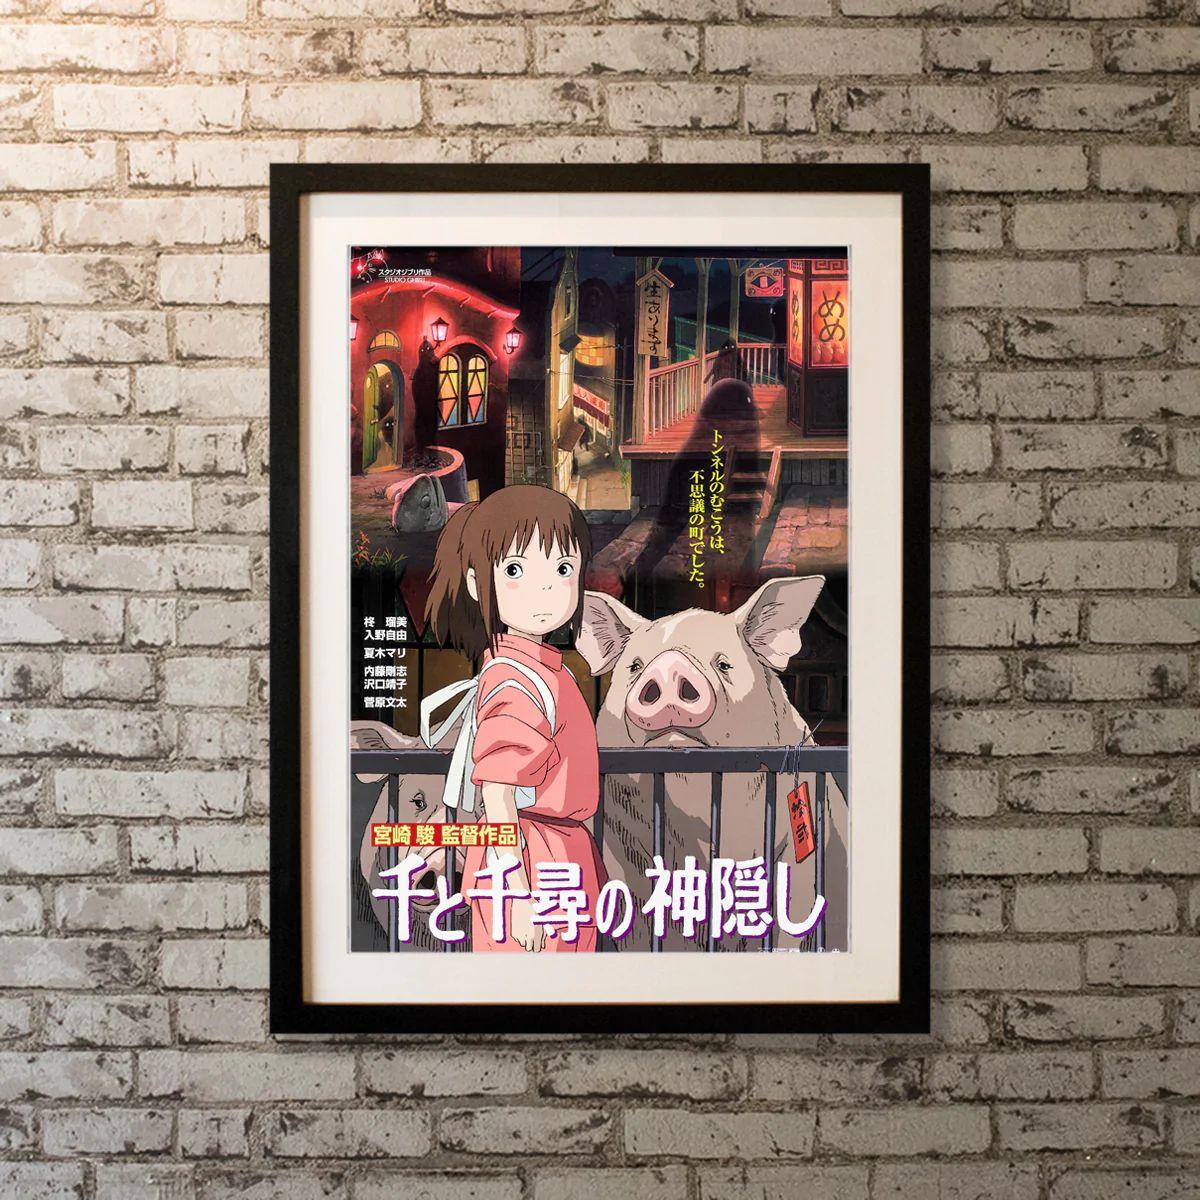 Spirited Away, Unframed Poster, 2001

Japanese B2 (20 X 28 Inches). During her family's move to the suburbs, a sullen 10-year-old girl wanders into a world ruled by gods, witches, and spirits, and where humans are changed into beasts.

Year: